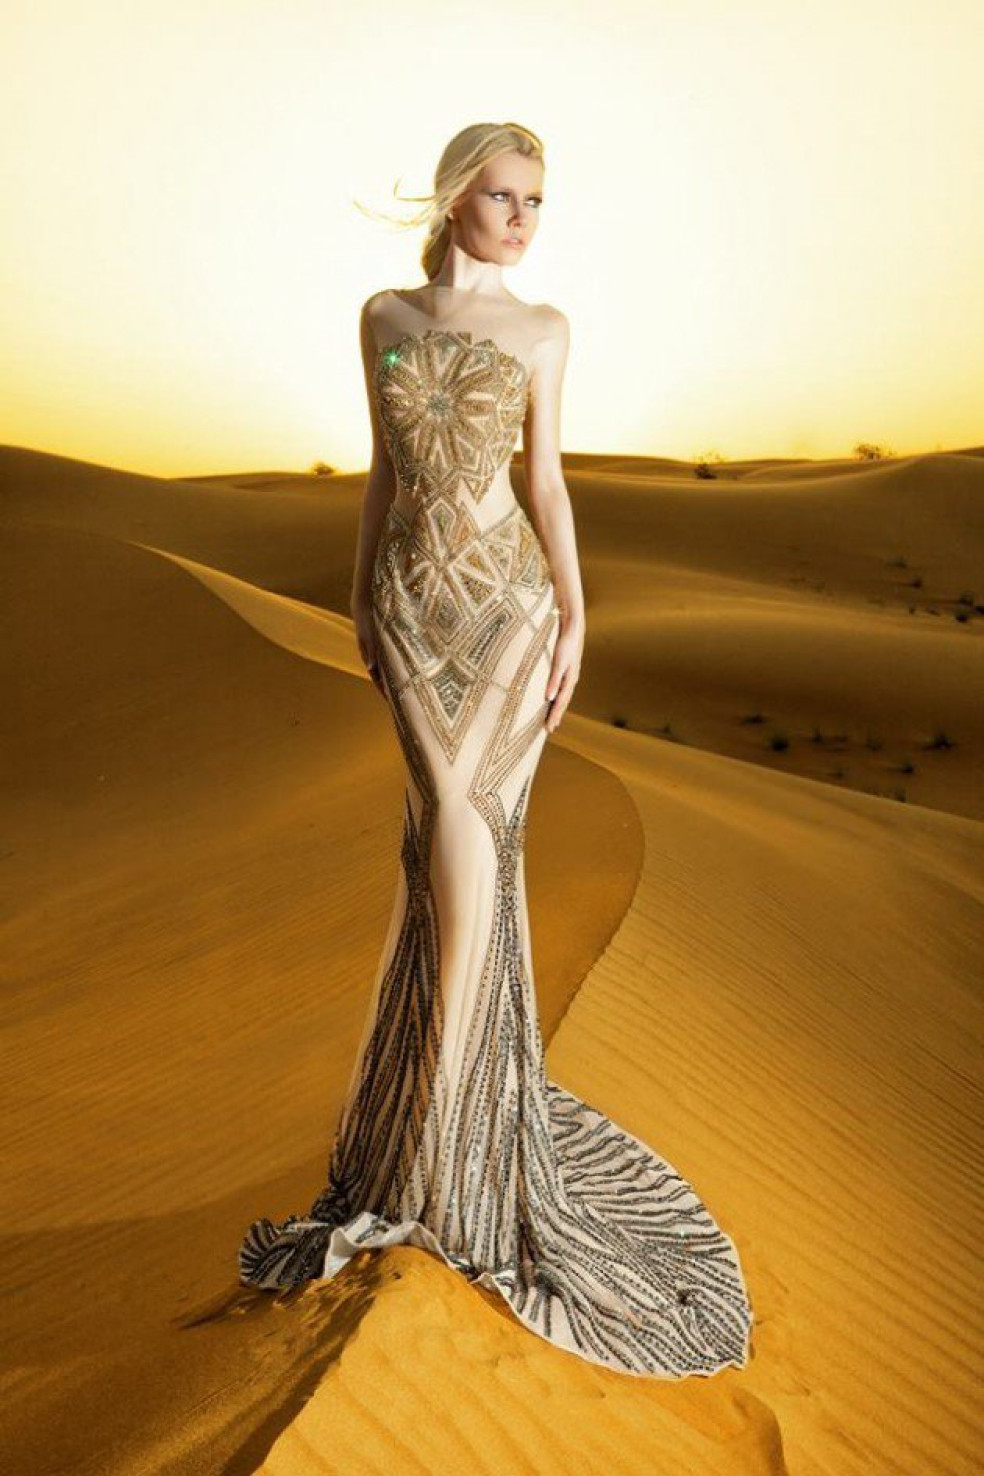 SMOKE AND MIRRORS BY DANY TABET FOR S/S 2015